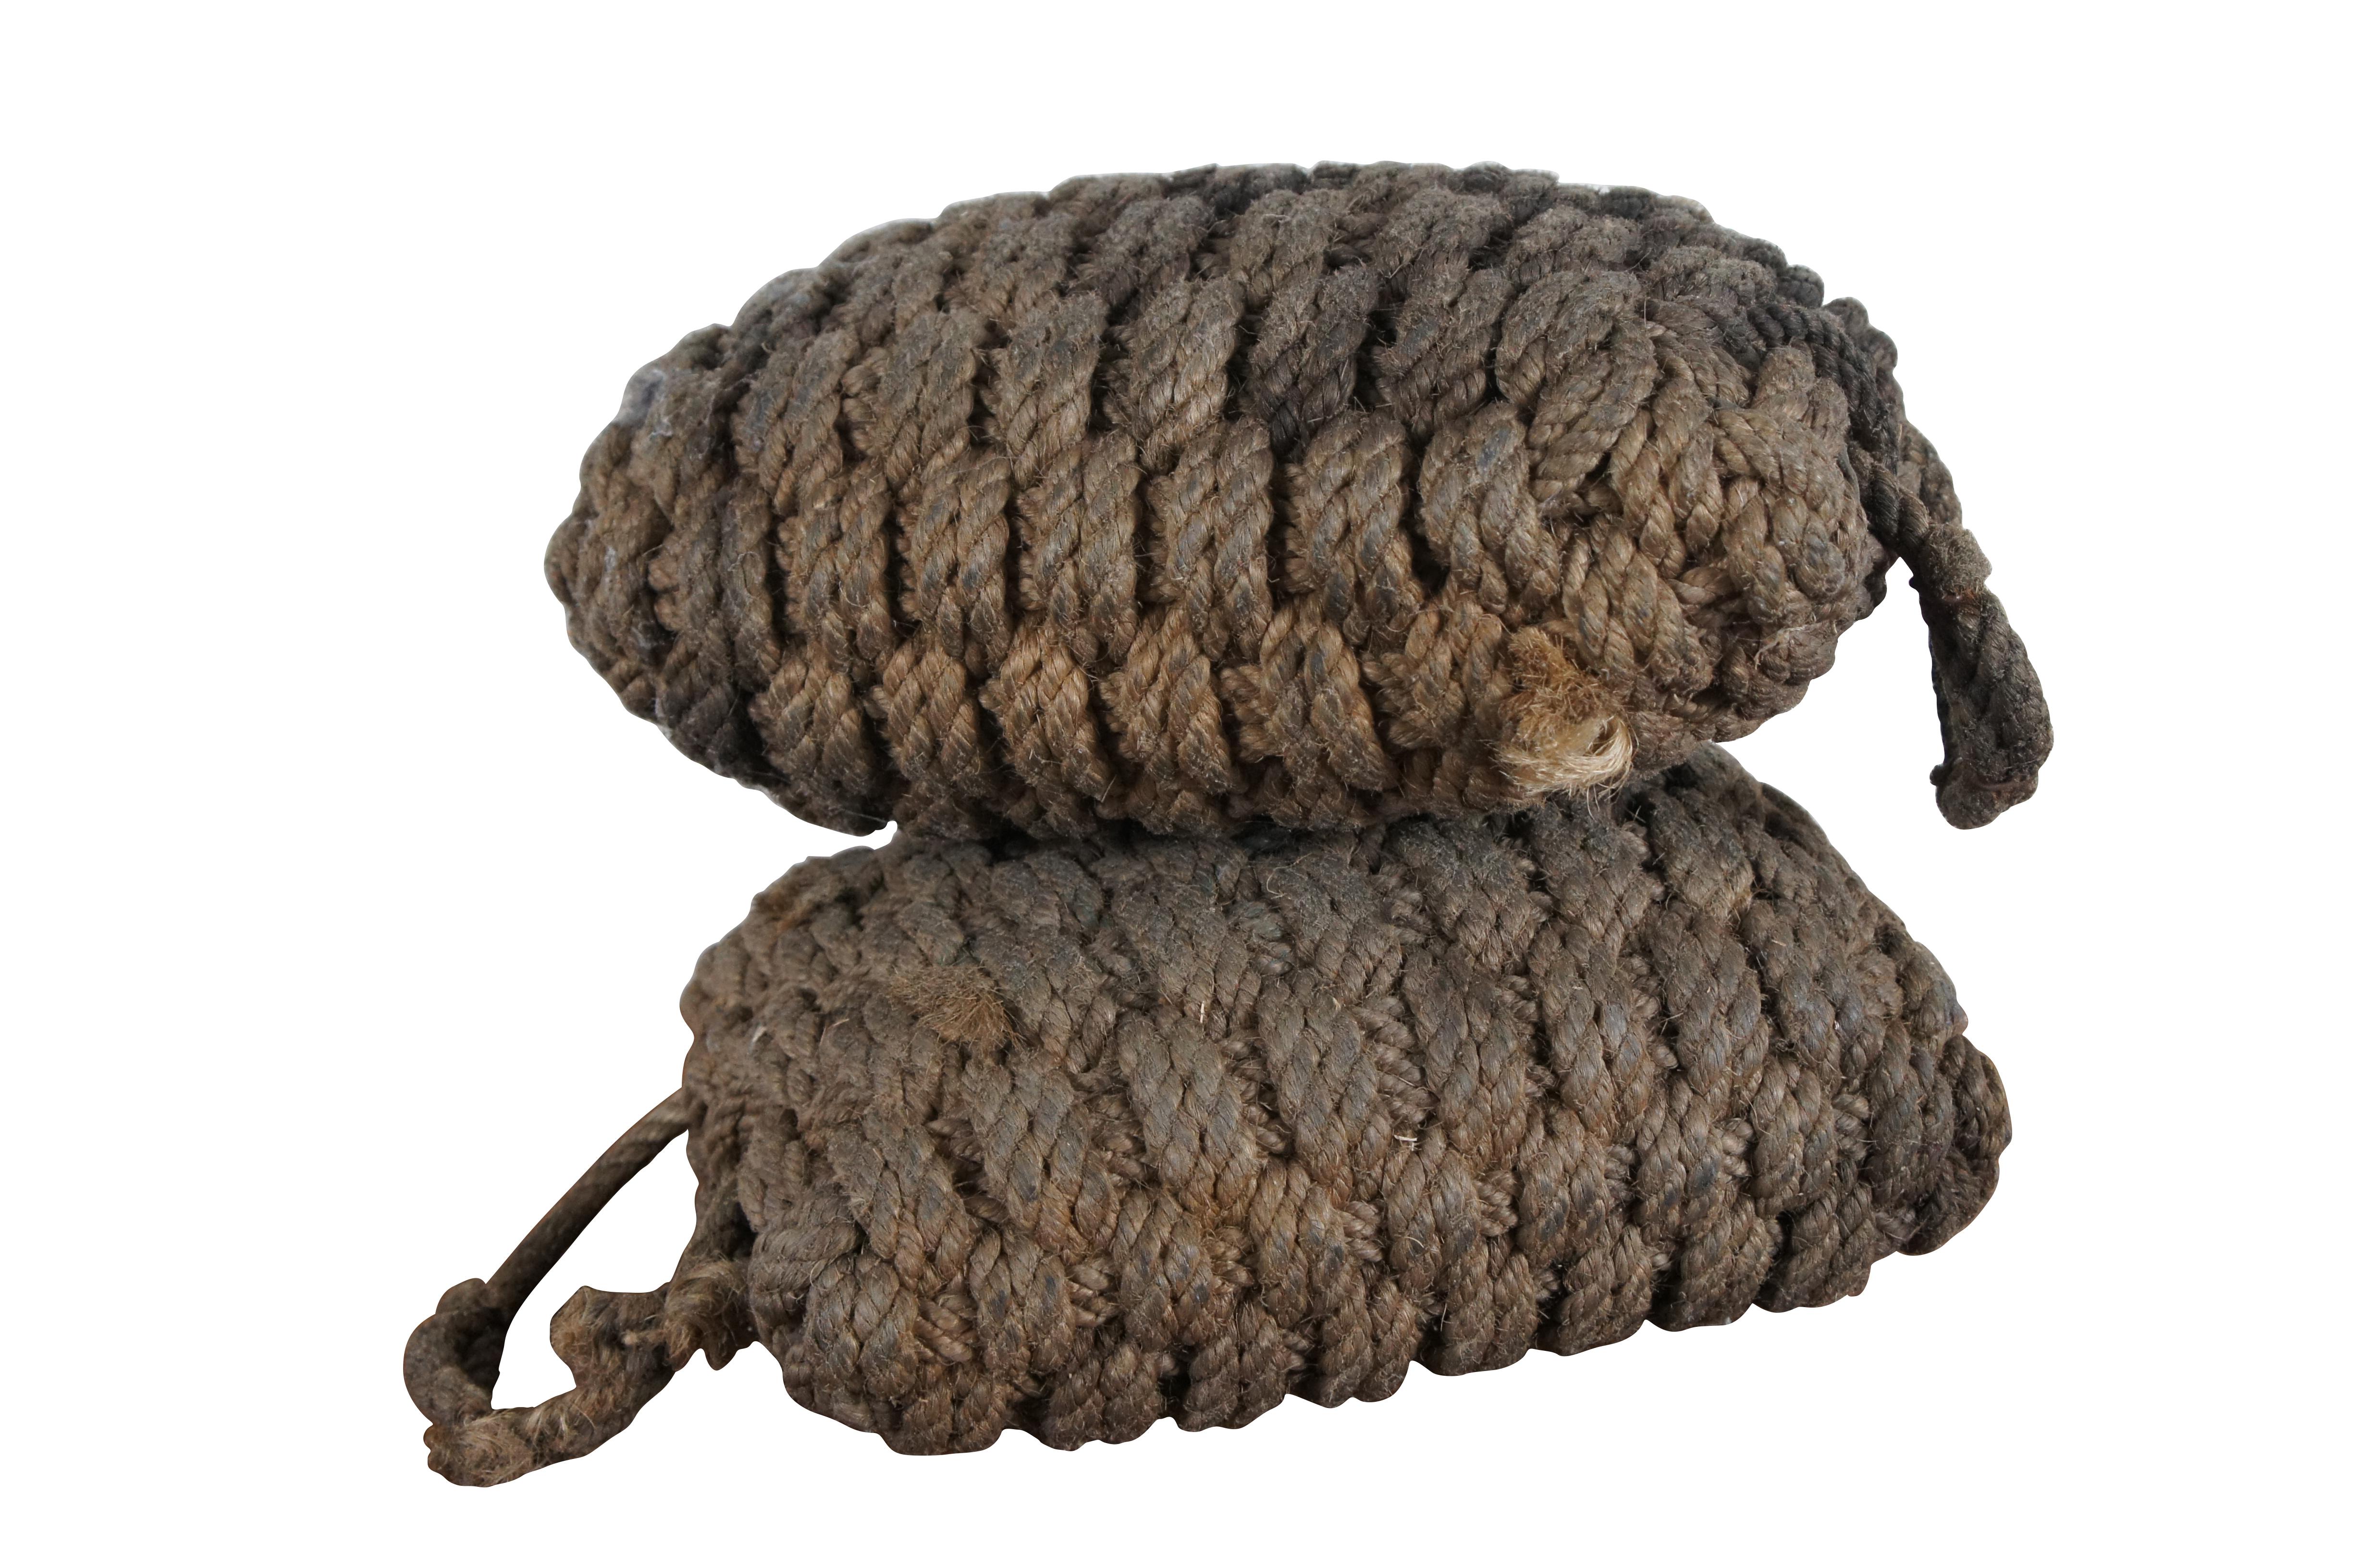 Pair of early 20th century boat bumpers / fenders, rectagnular shape woven from natural hemp rope with handle.

Dimensions:
13